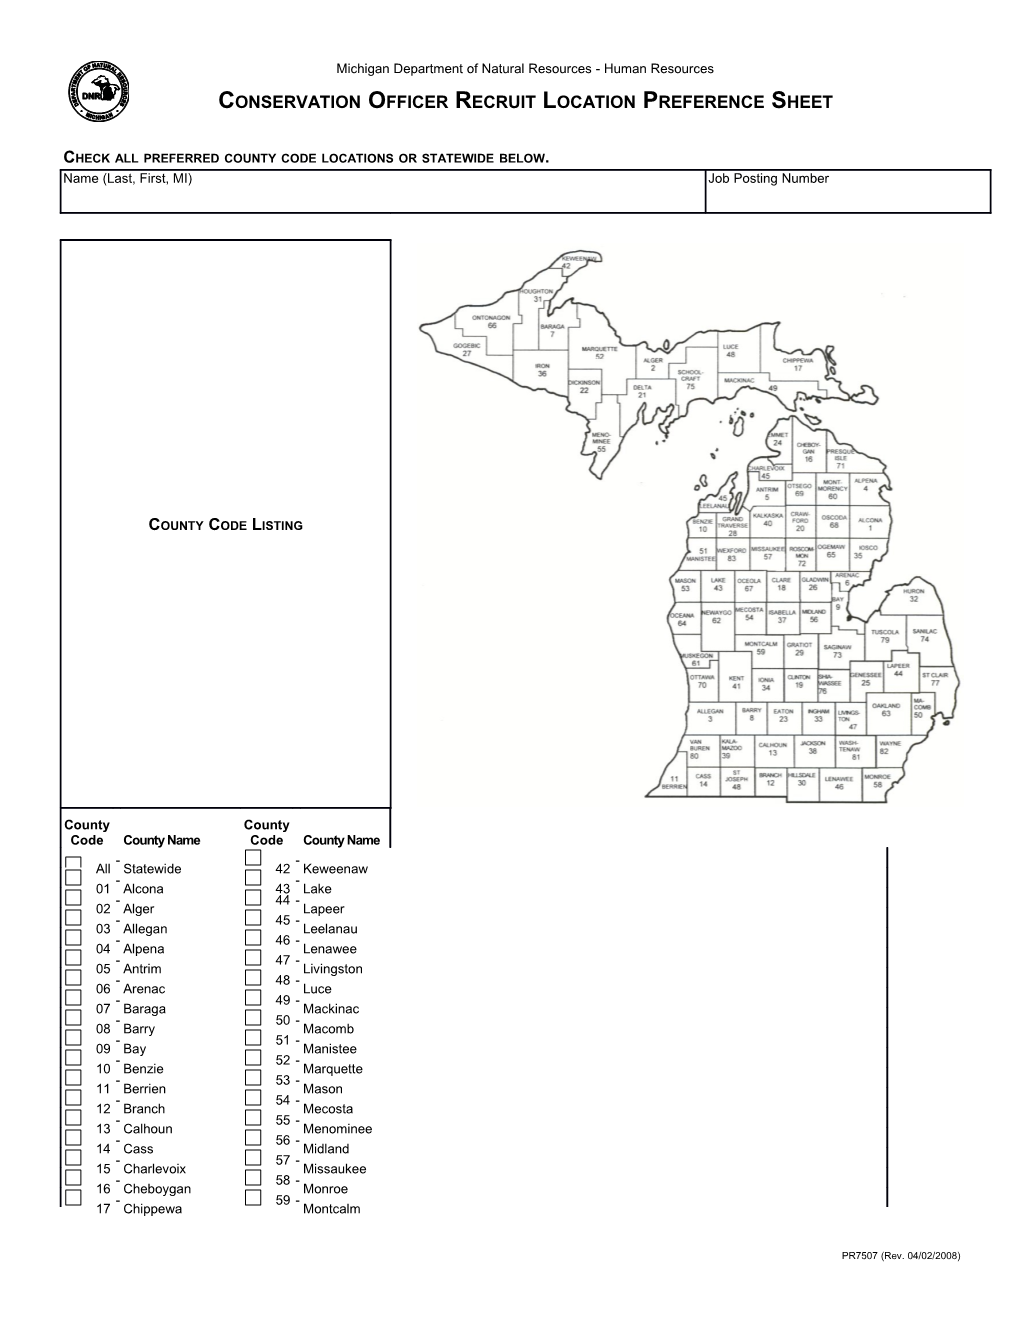 Check All Preferred County Code Locations Or Statewide Below